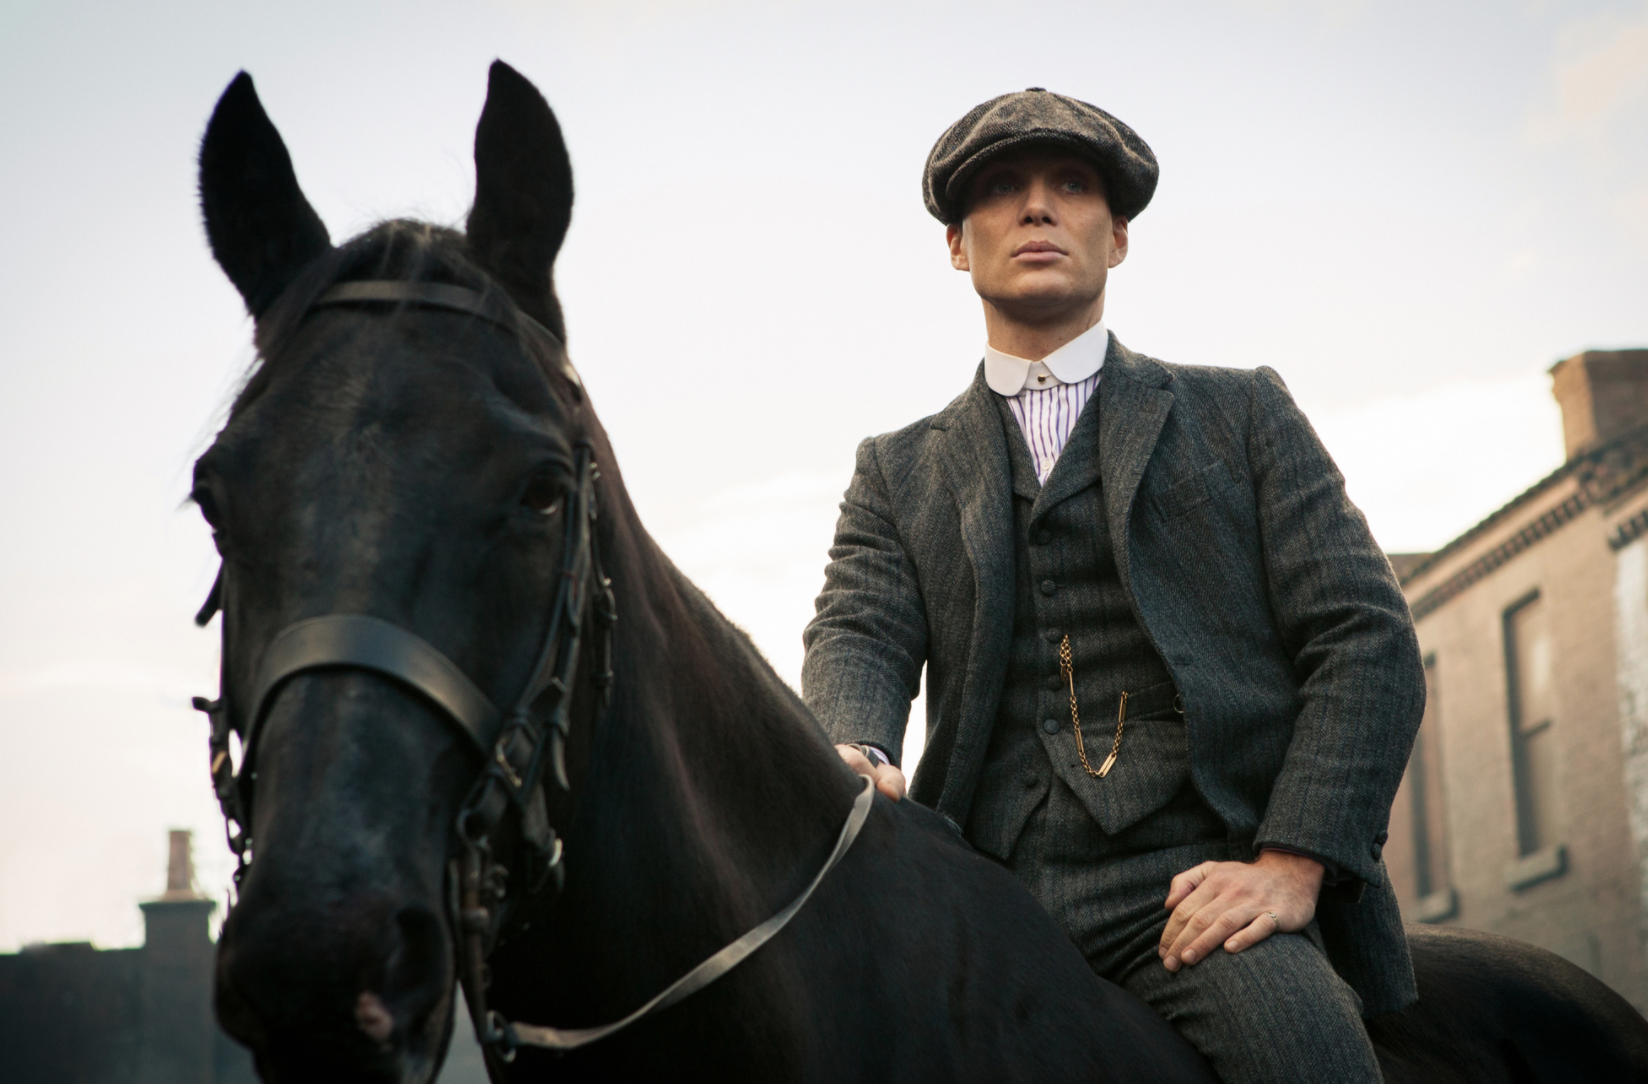 Peaky Blinders: Will There Be a Season 7? The Movie Will Shoot in 2023